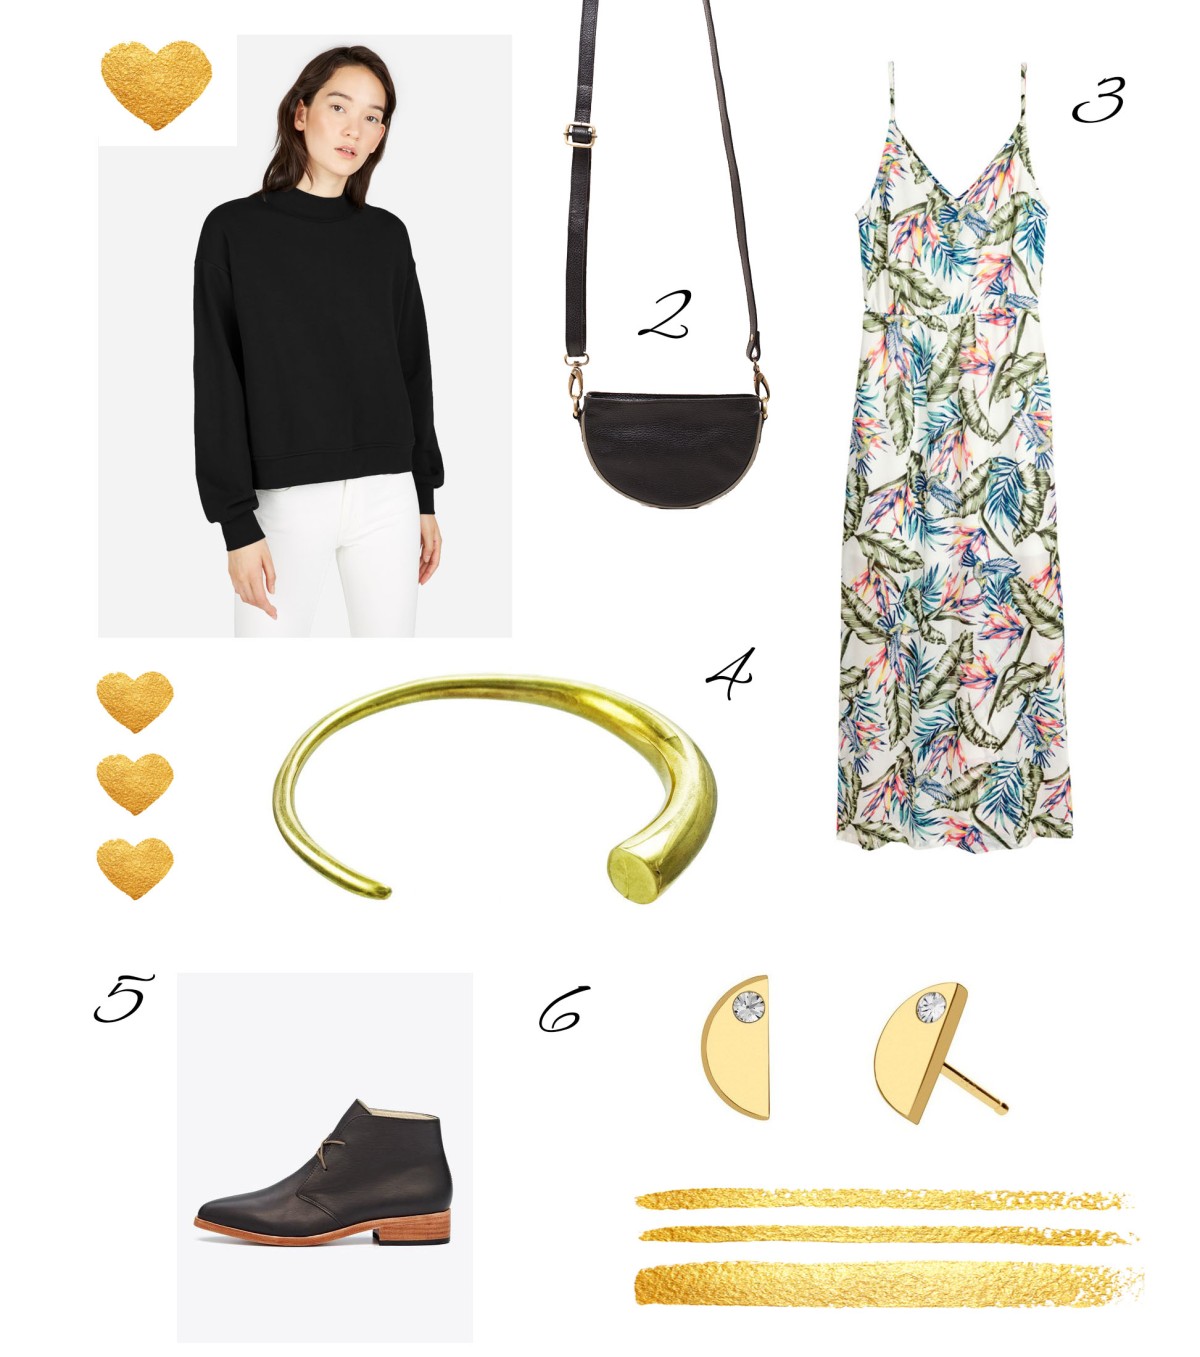 Thursday’s ethical style